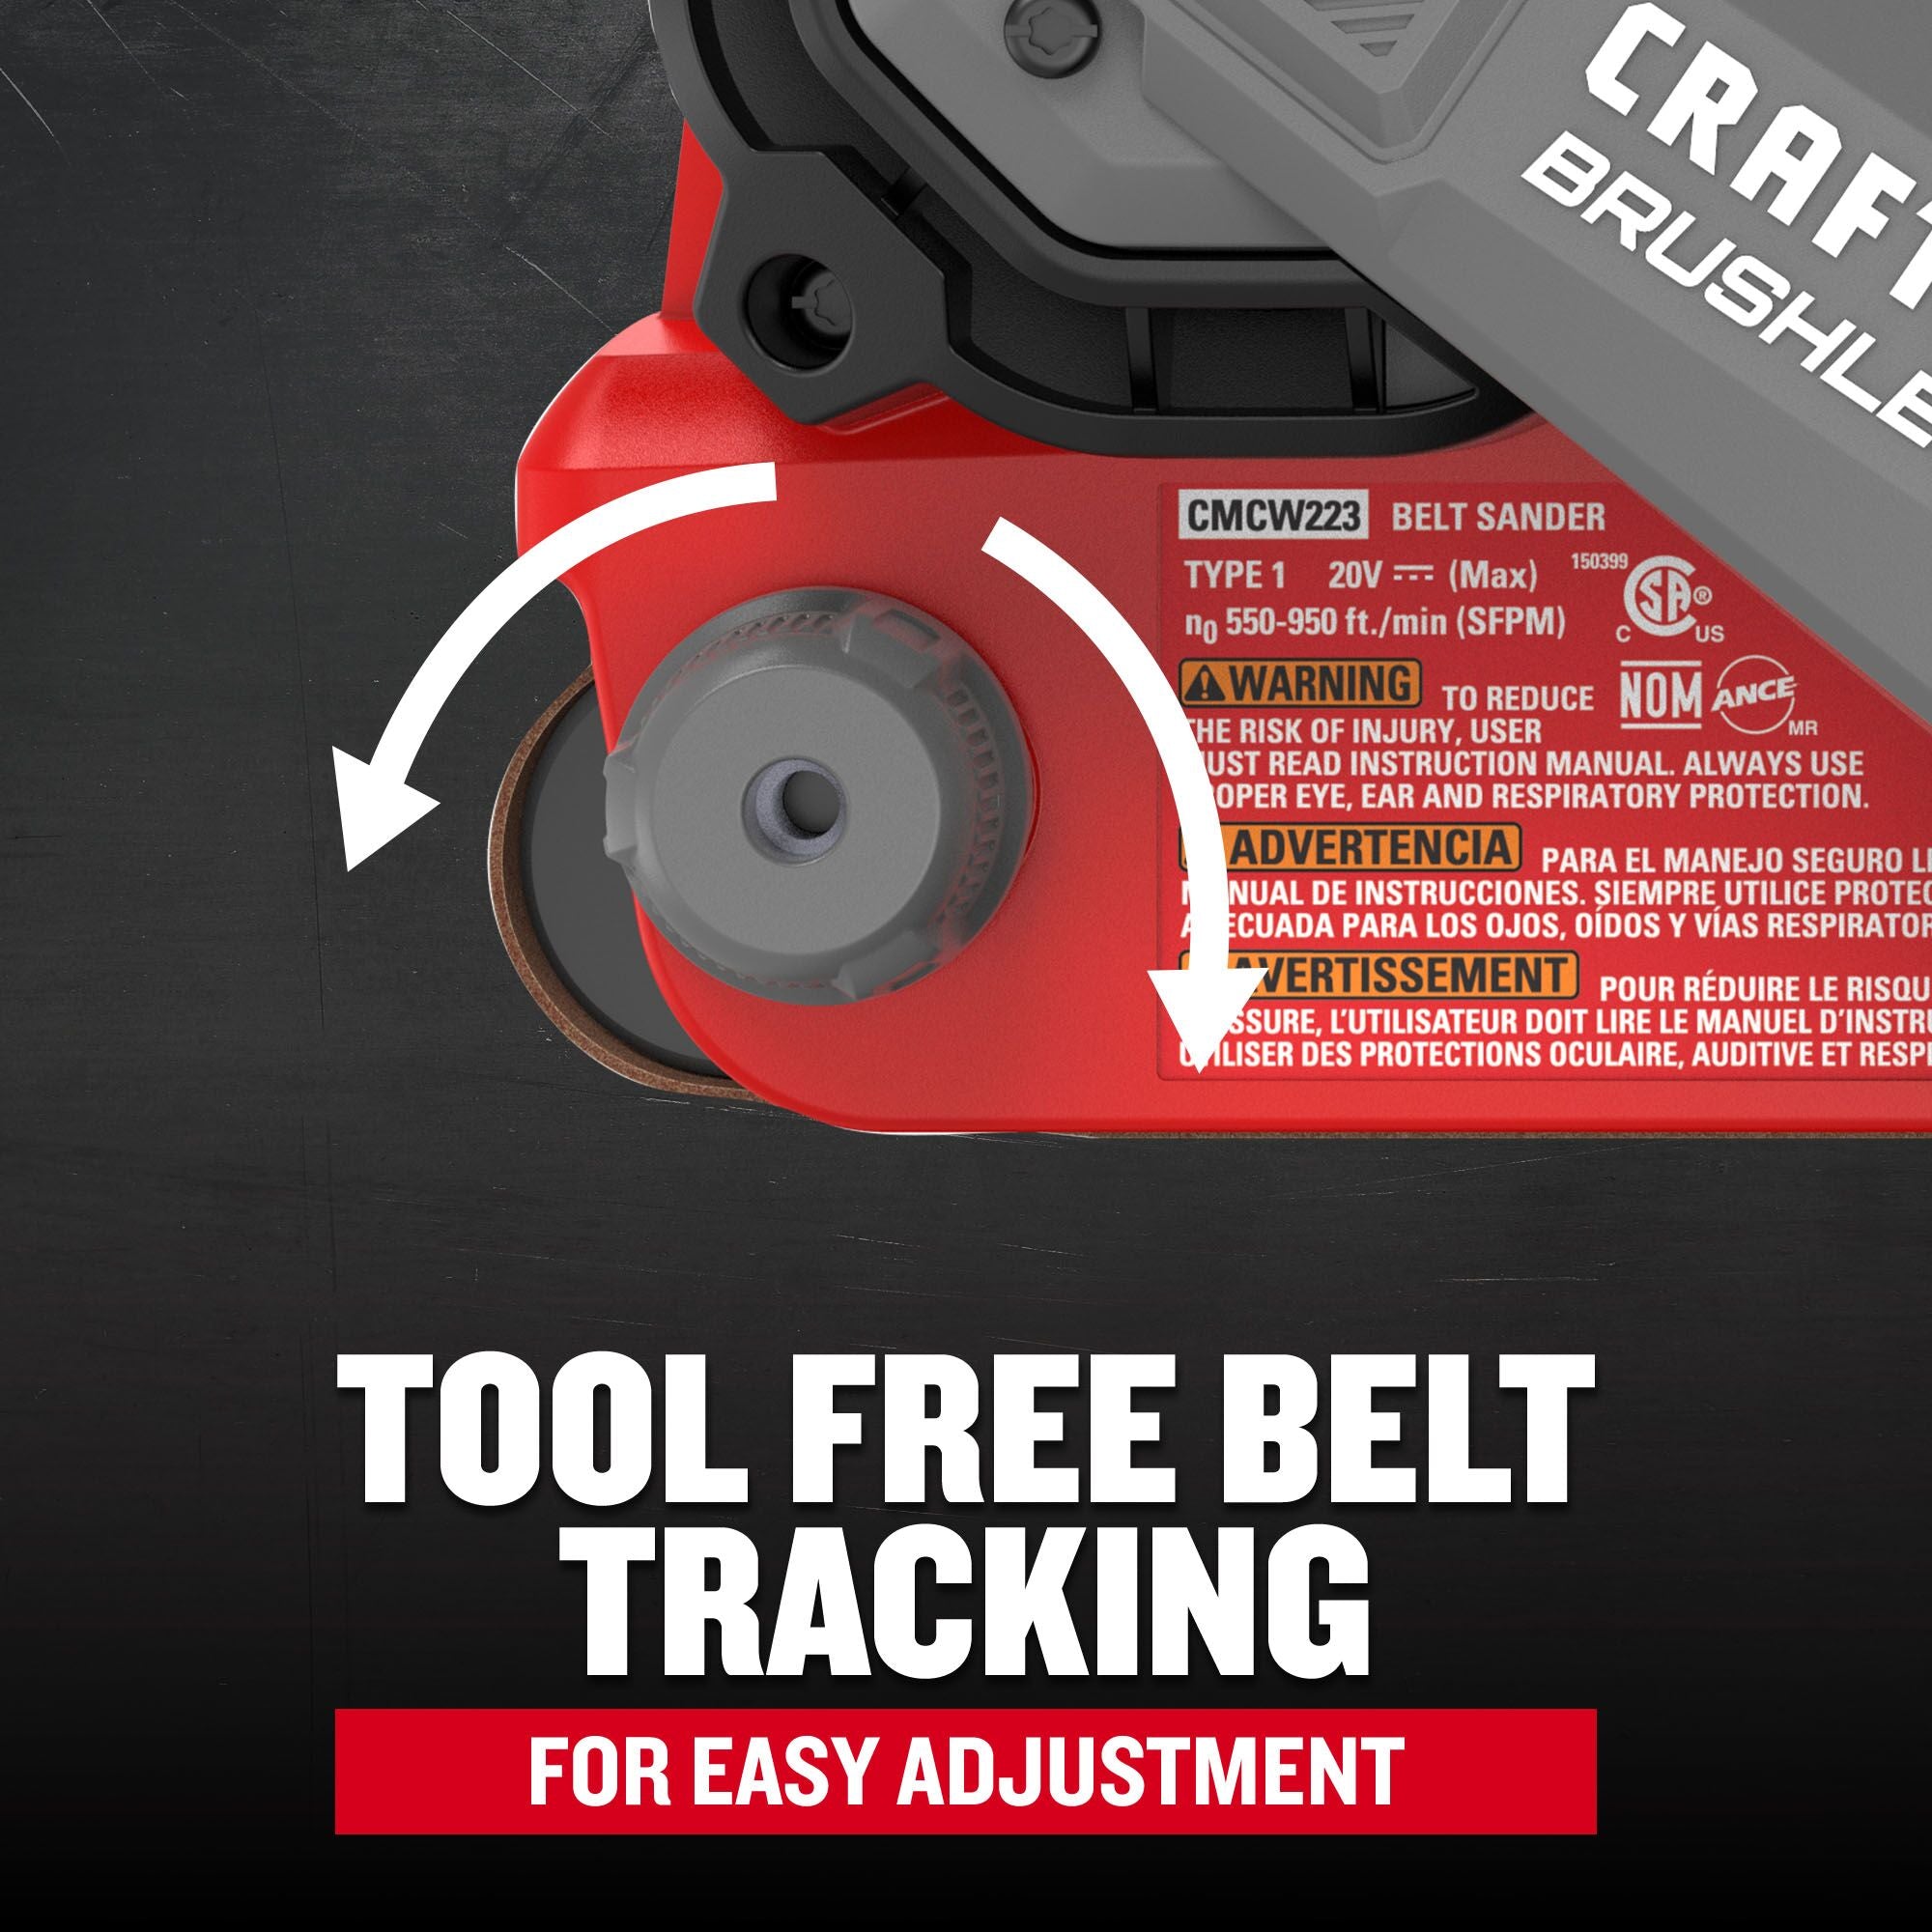 Tool free belt tracking for easy adjustment